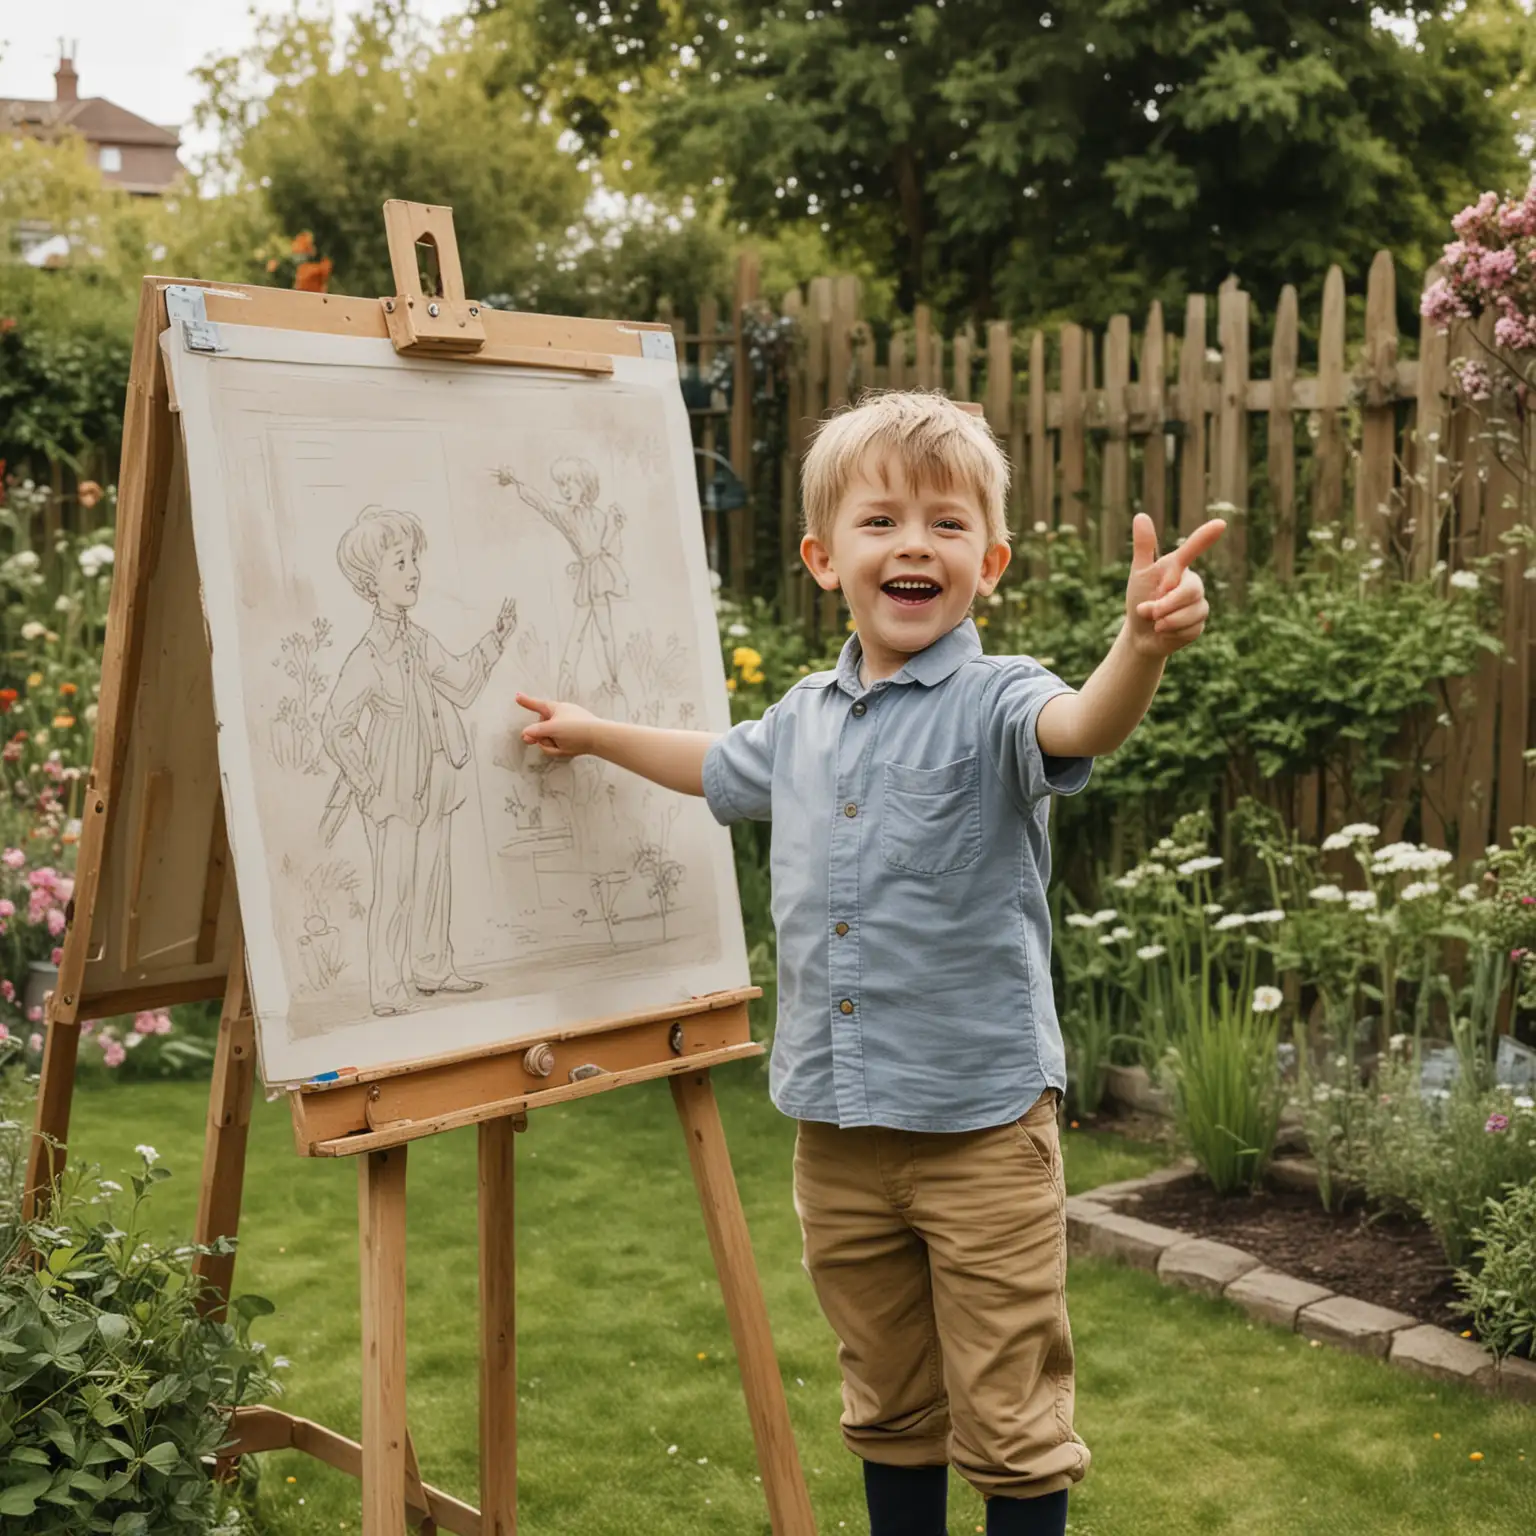 young boy around 6 years old excitedly pointing to a poster on an easel in the background, in a garden